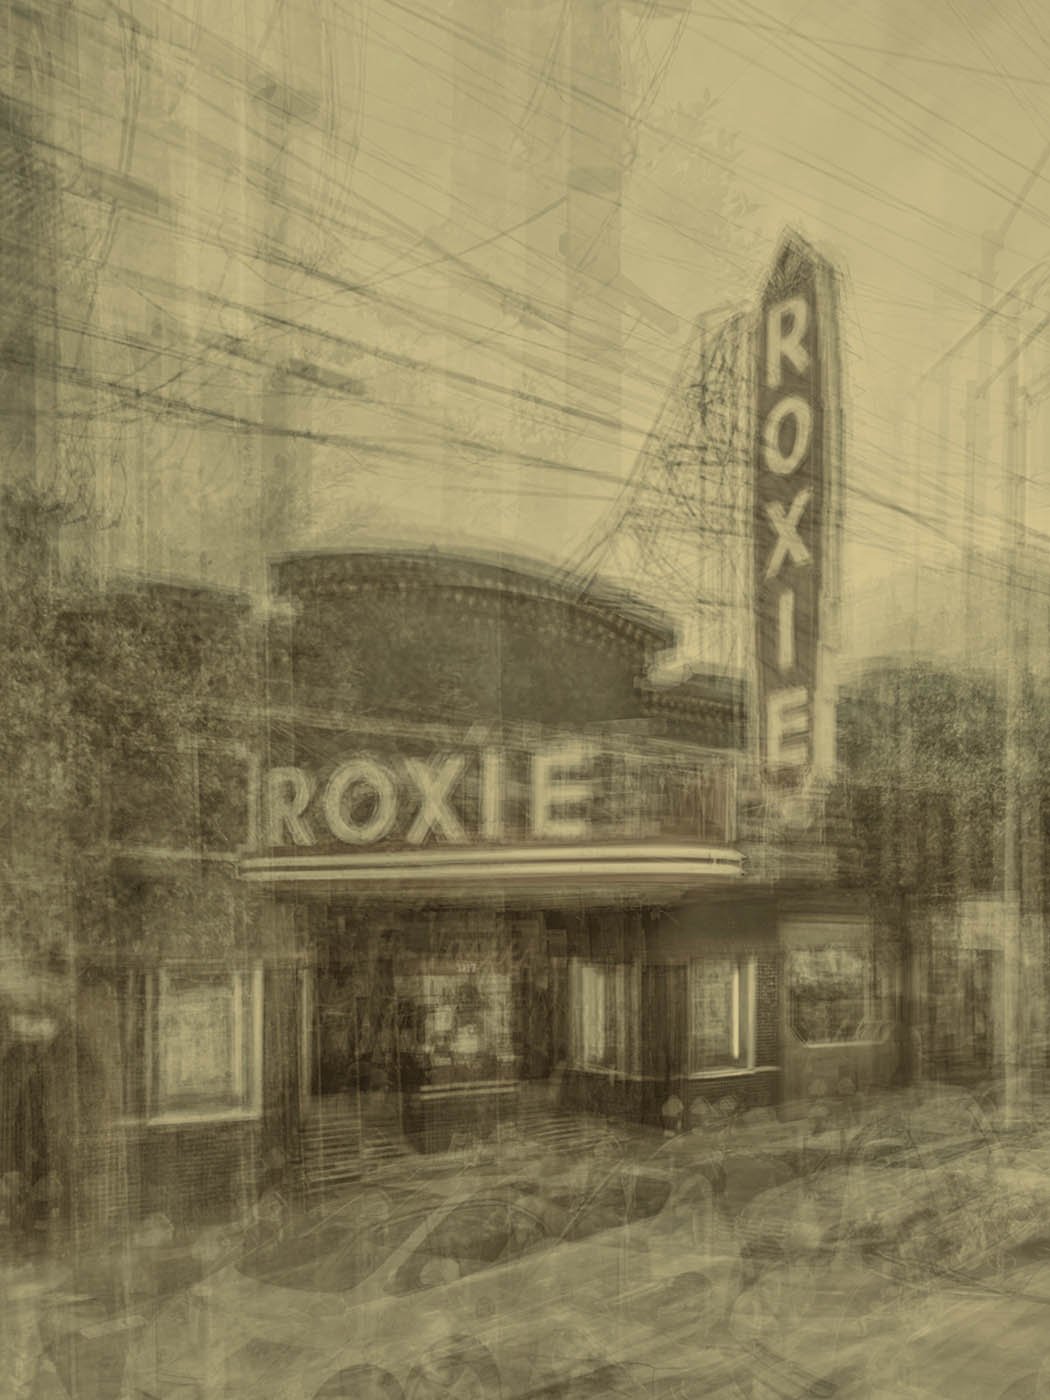 Roxie Theater by Pep Ventosa